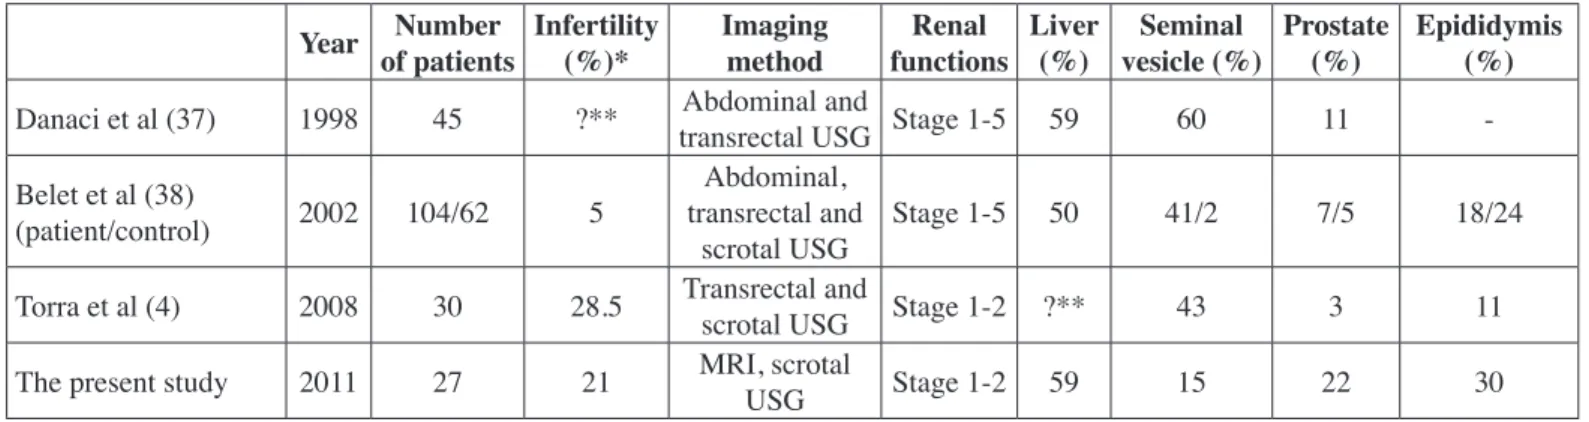 Table IV: Important studies conducted about genitourinary cysts in autosomal dominant polycystic kidney disease.